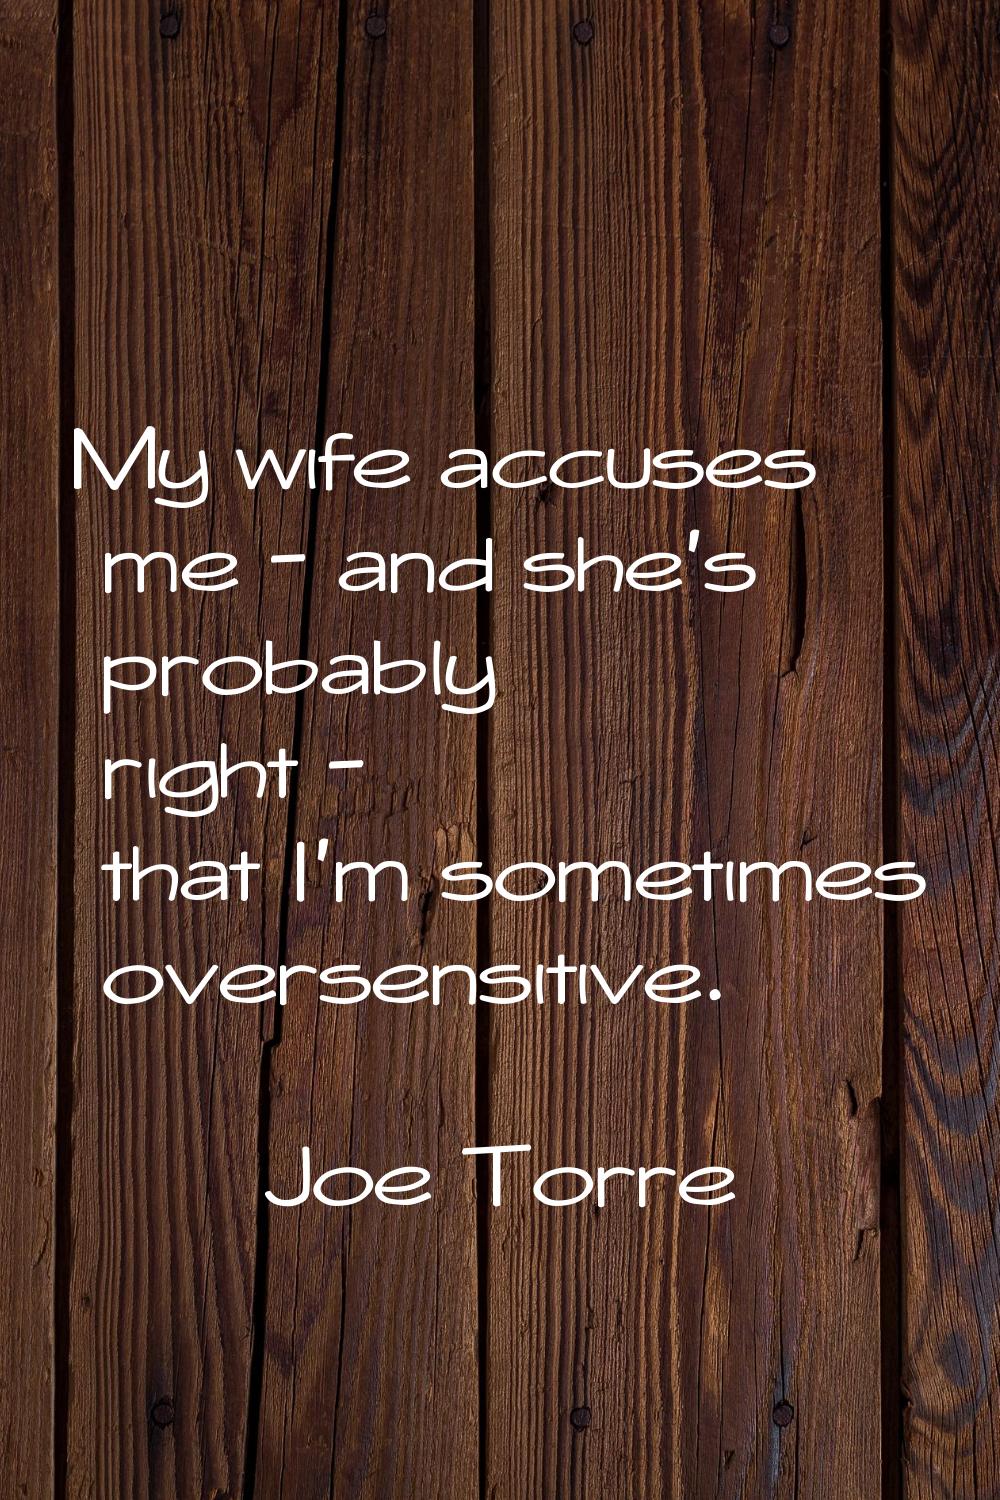 My wife accuses me - and she's probably right - that I'm sometimes oversensitive.